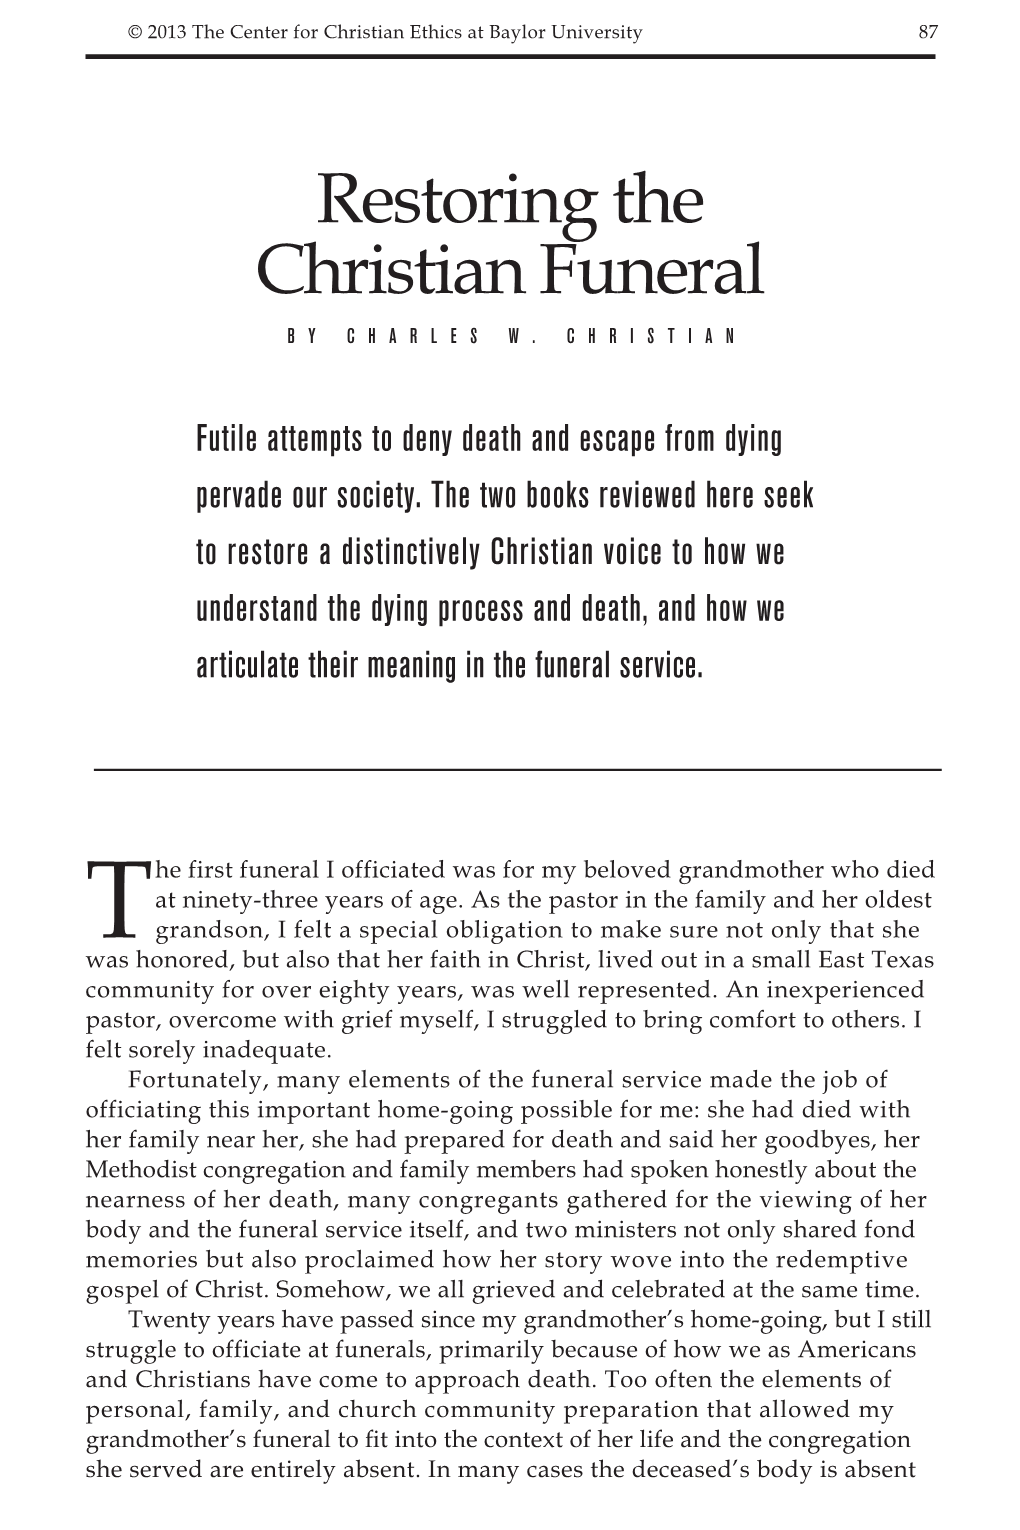 Restoring the Christian Funeral by Charles W